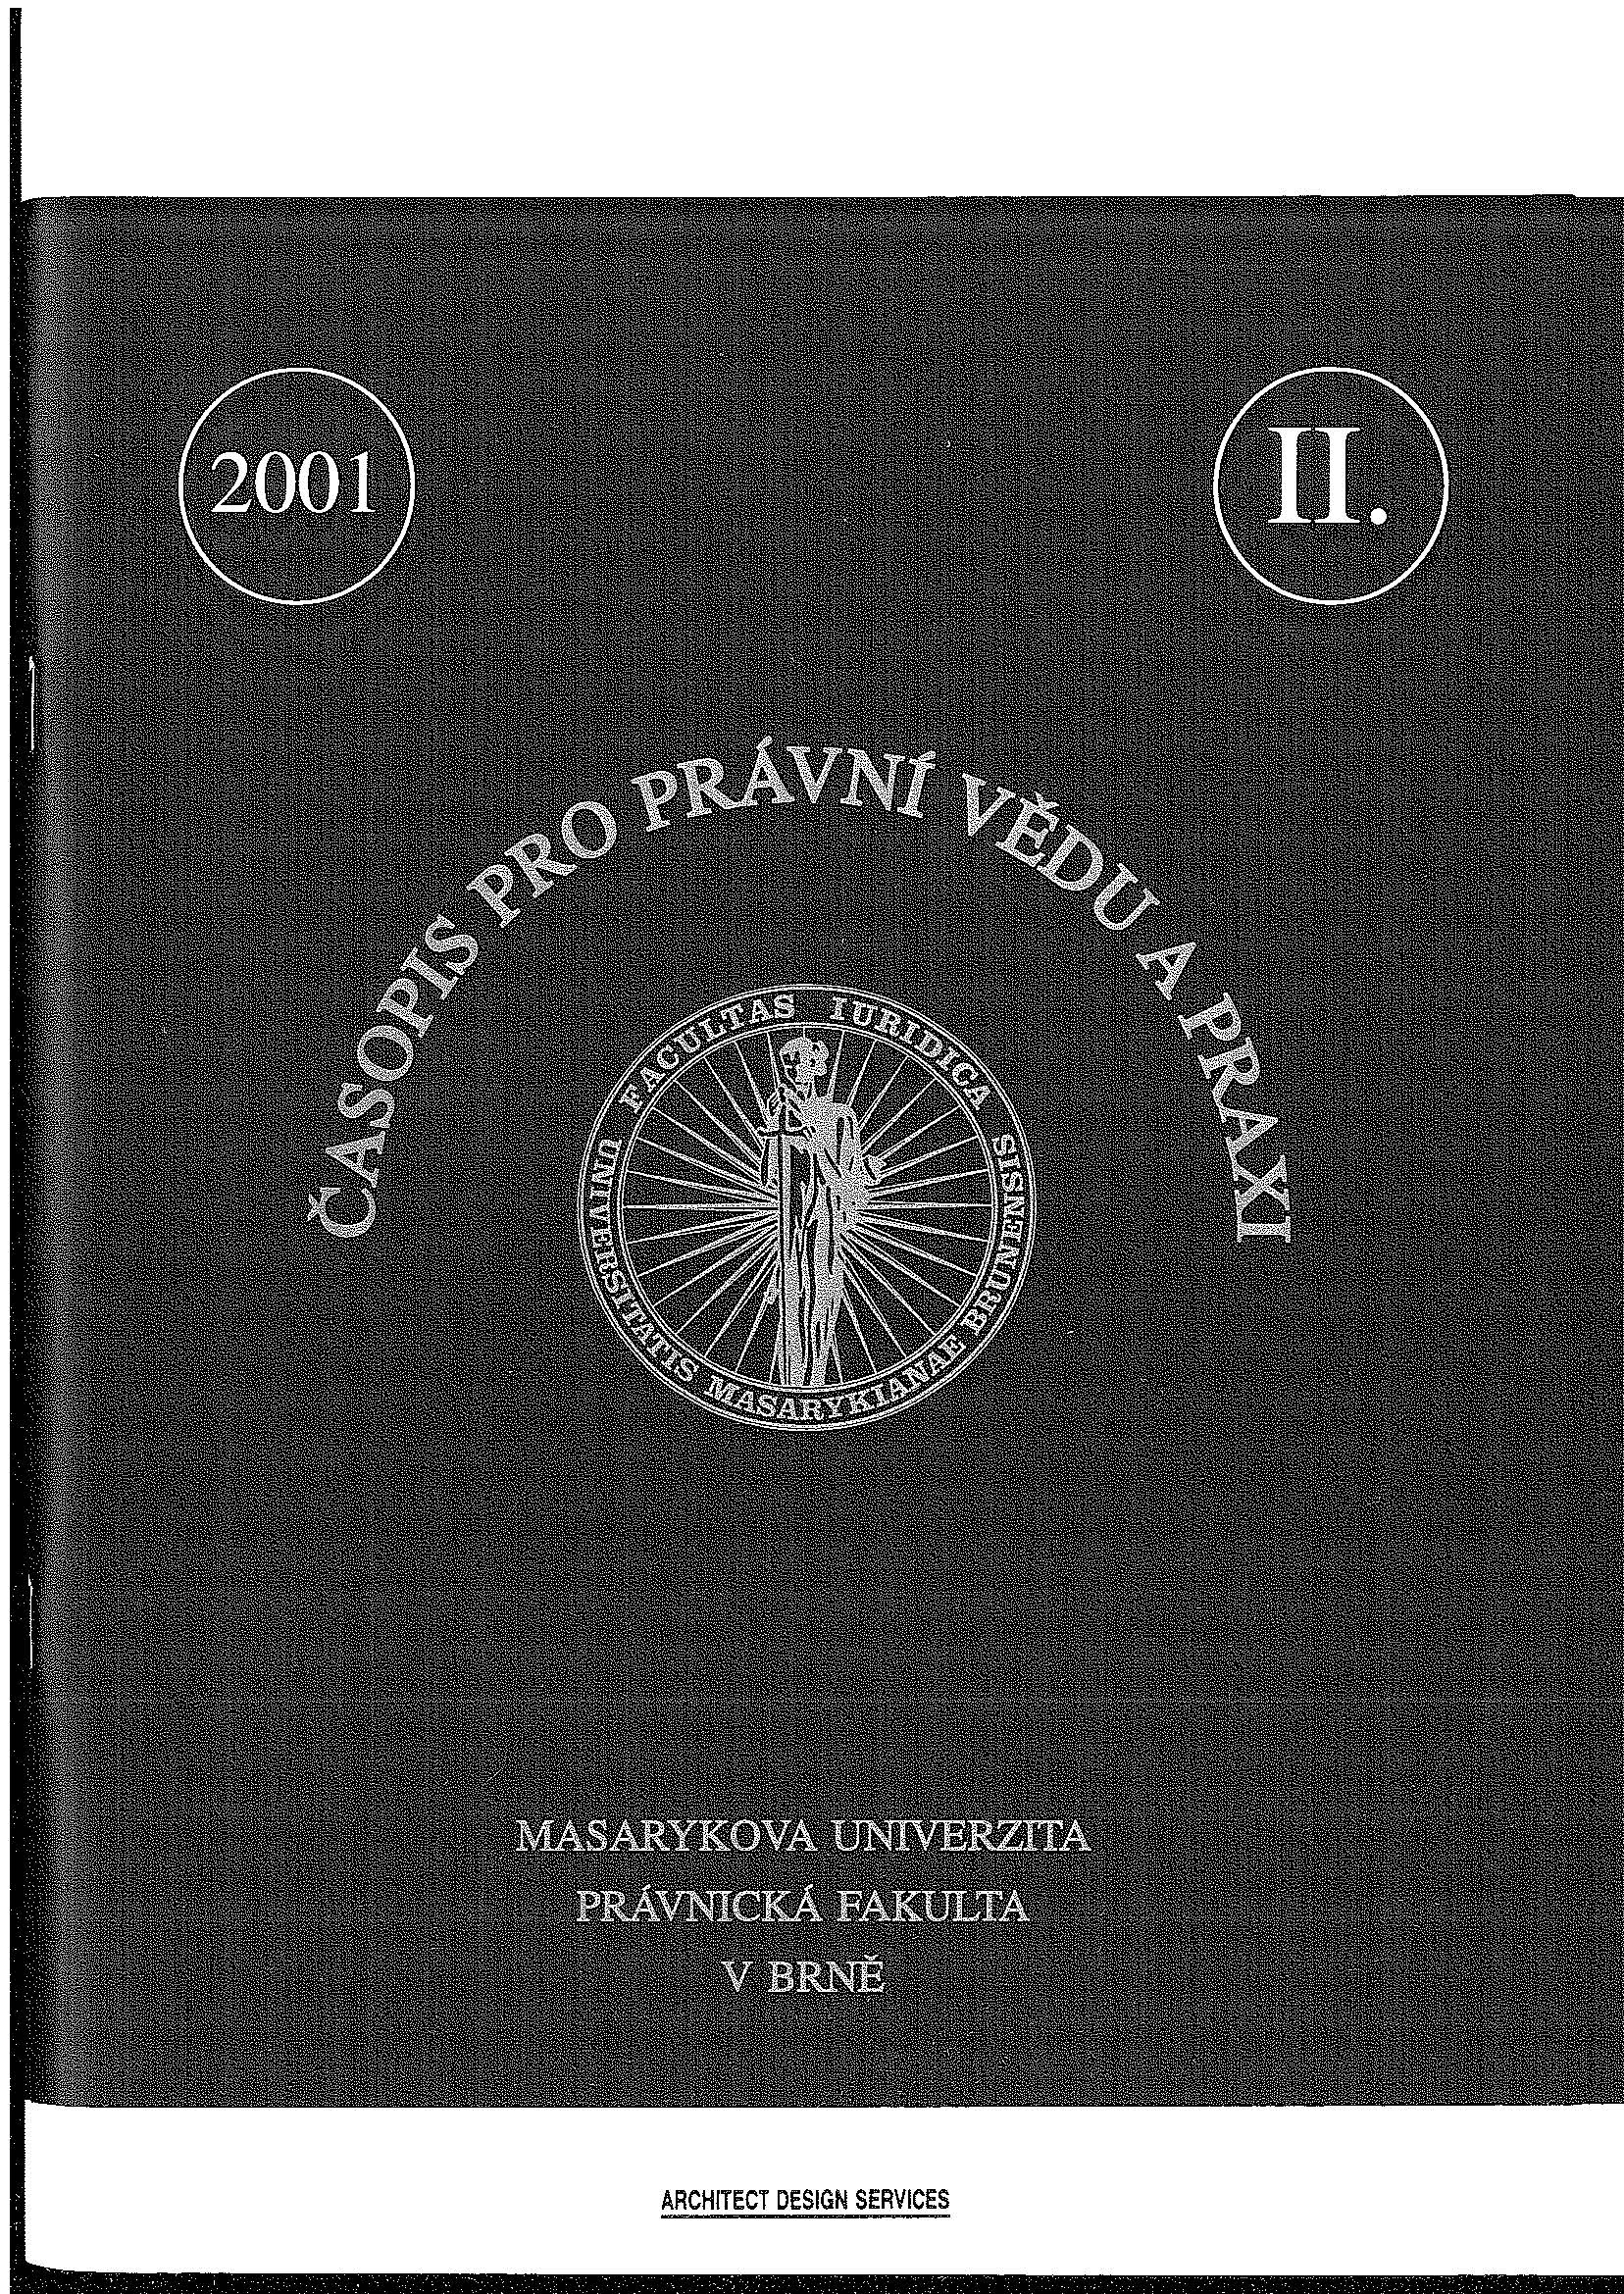 František Weyr, a philosopher of law, political scientist, and layer Cover Image